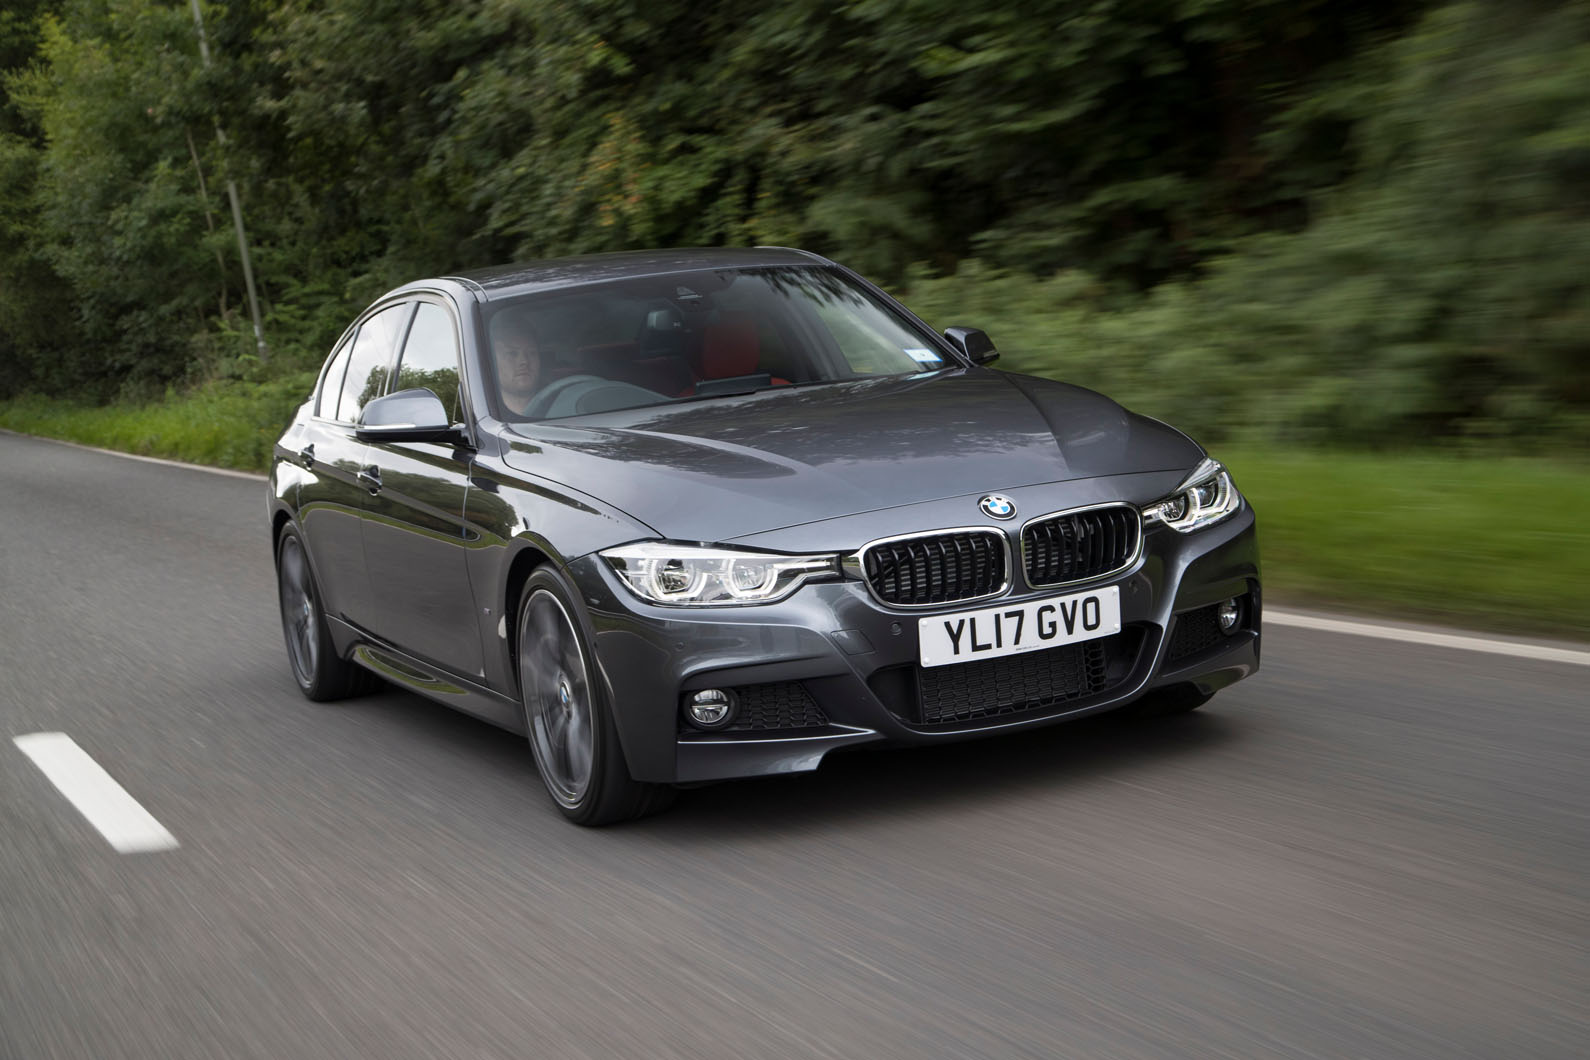 Nearly new buying guide: BMW 3 Series (F30)